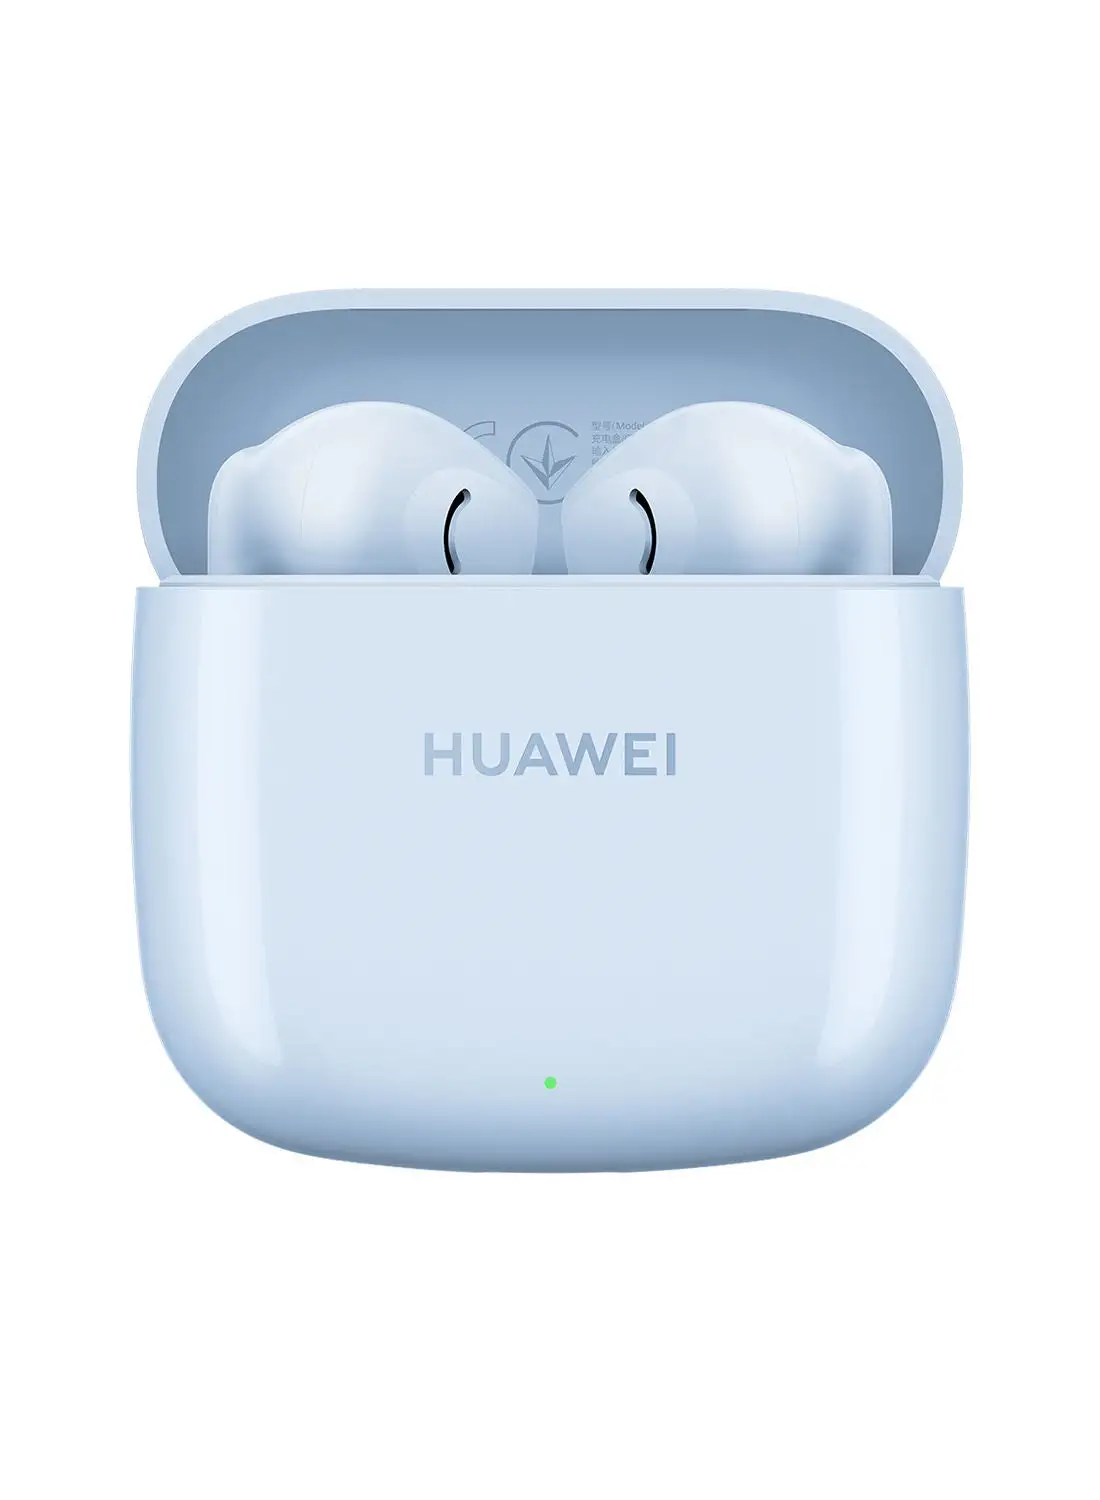 HUAWEI FreeBuds SE 2 In-ear Earphones, Wireless Bluetooth 5.3, 40-Hour Battery Life, 3 Hours of Music Playback on a 10-Minute Charge, Compact and Comfortable, IP54 Dust and Splash-Resistance Isle Blue